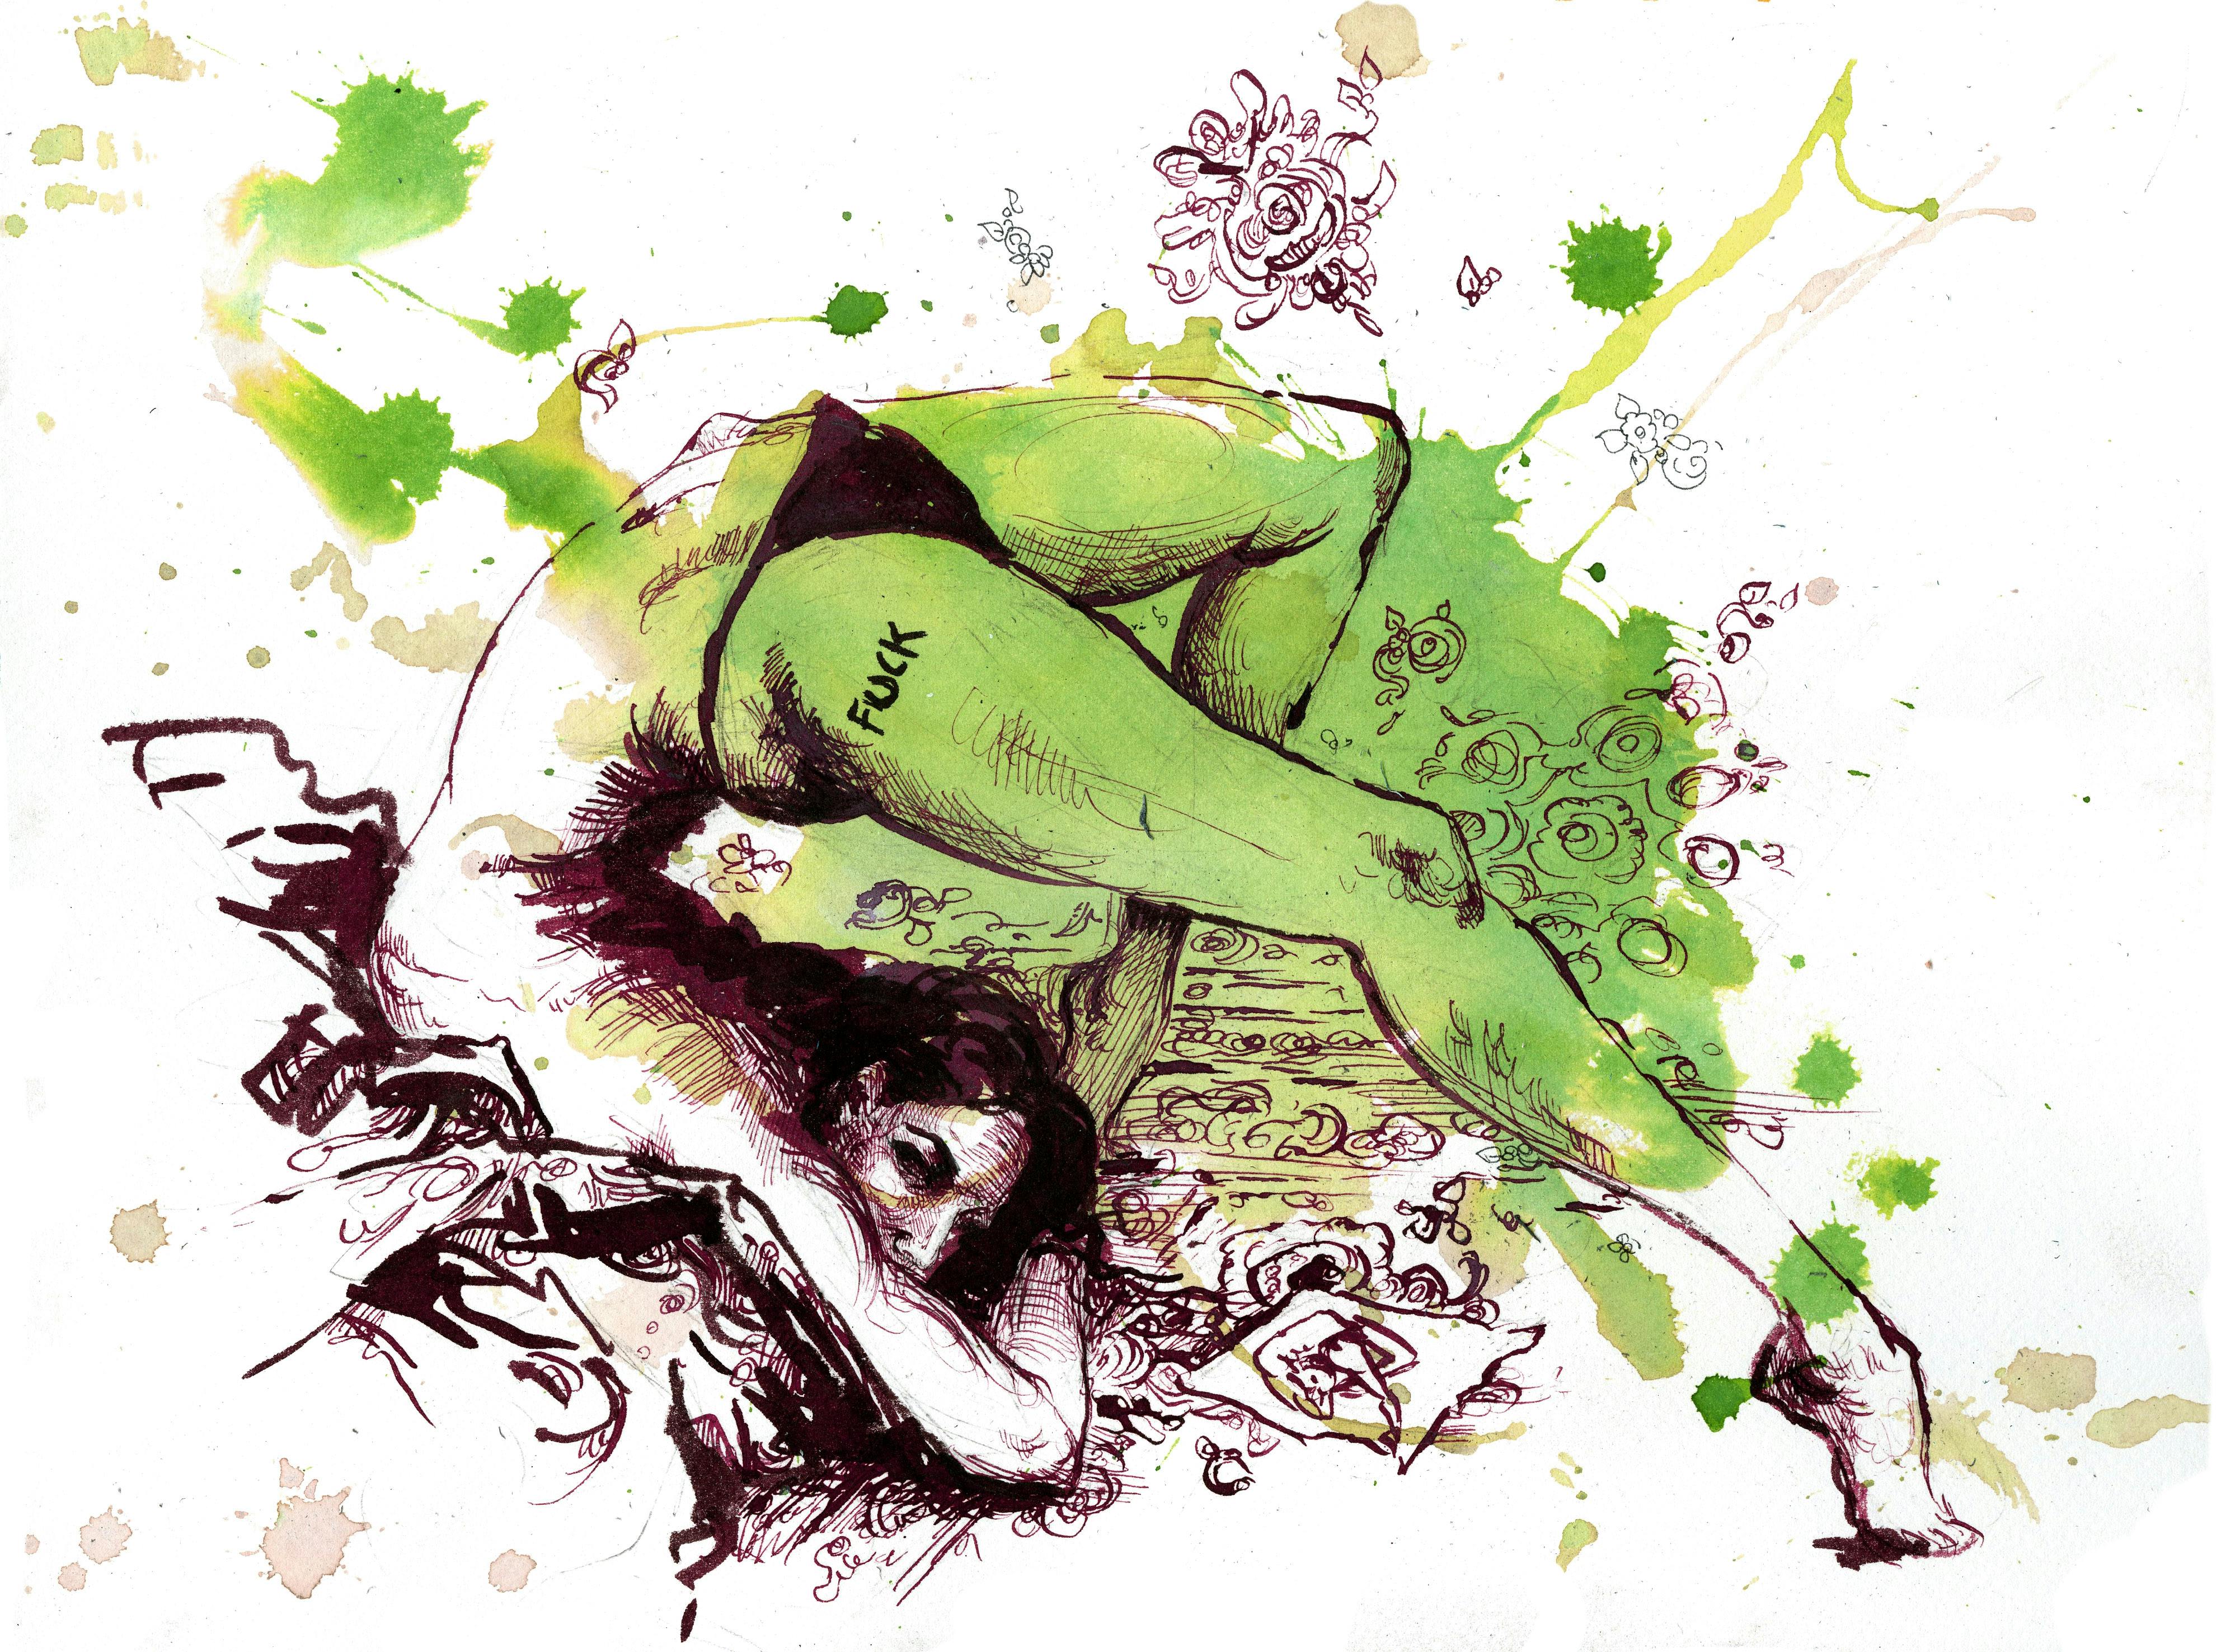 Molly Crabapples Naked Ambition The New Republic image